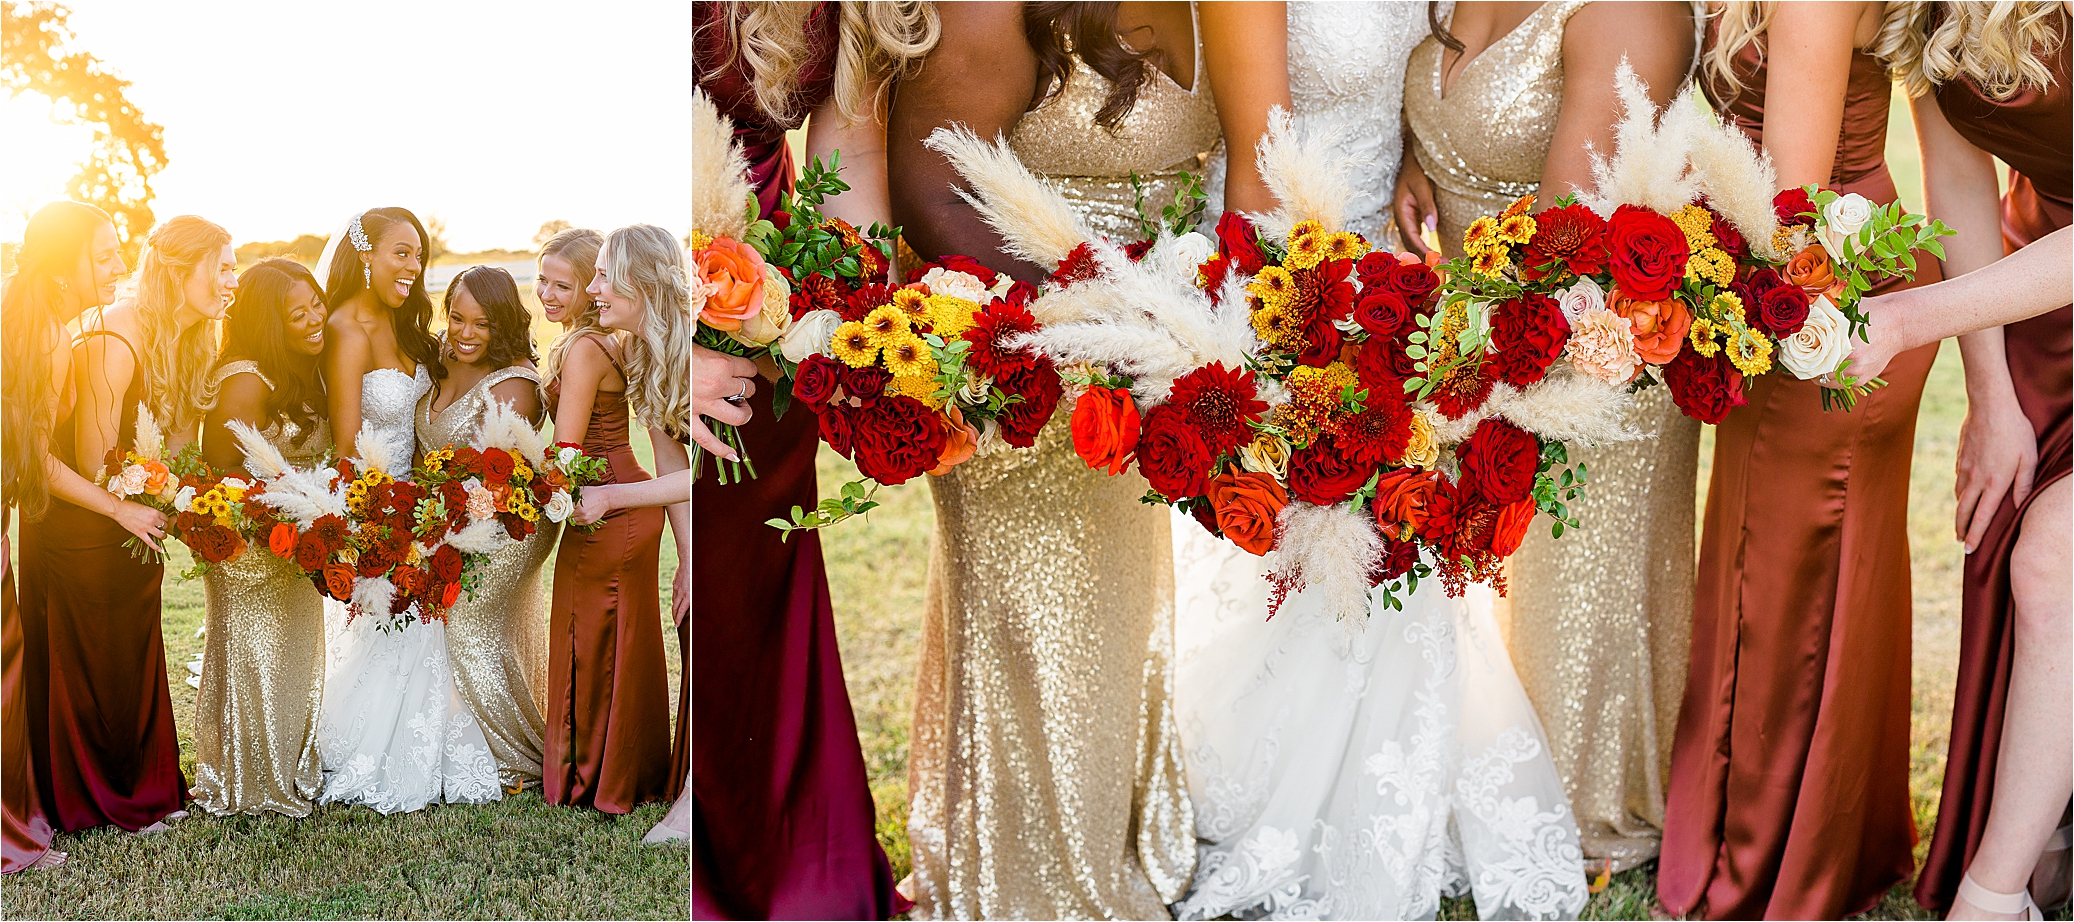 Flower details and bridesmaids dressed at The Milestone in Boerne, Texas by Wedding Photographer Jillian Hogan 